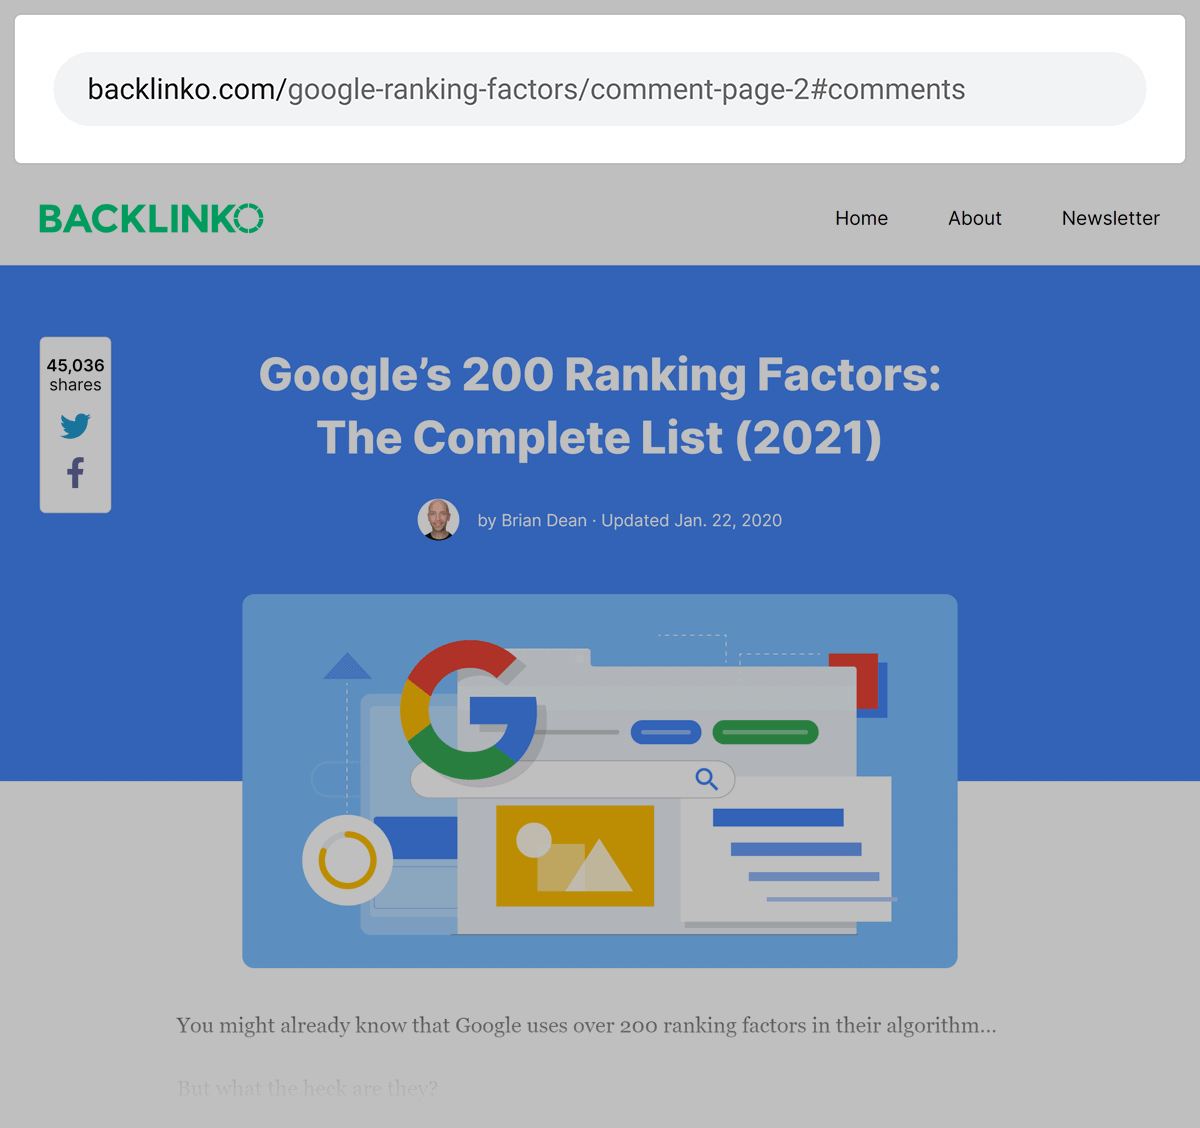 Backlinko – Comments pages have original post on them